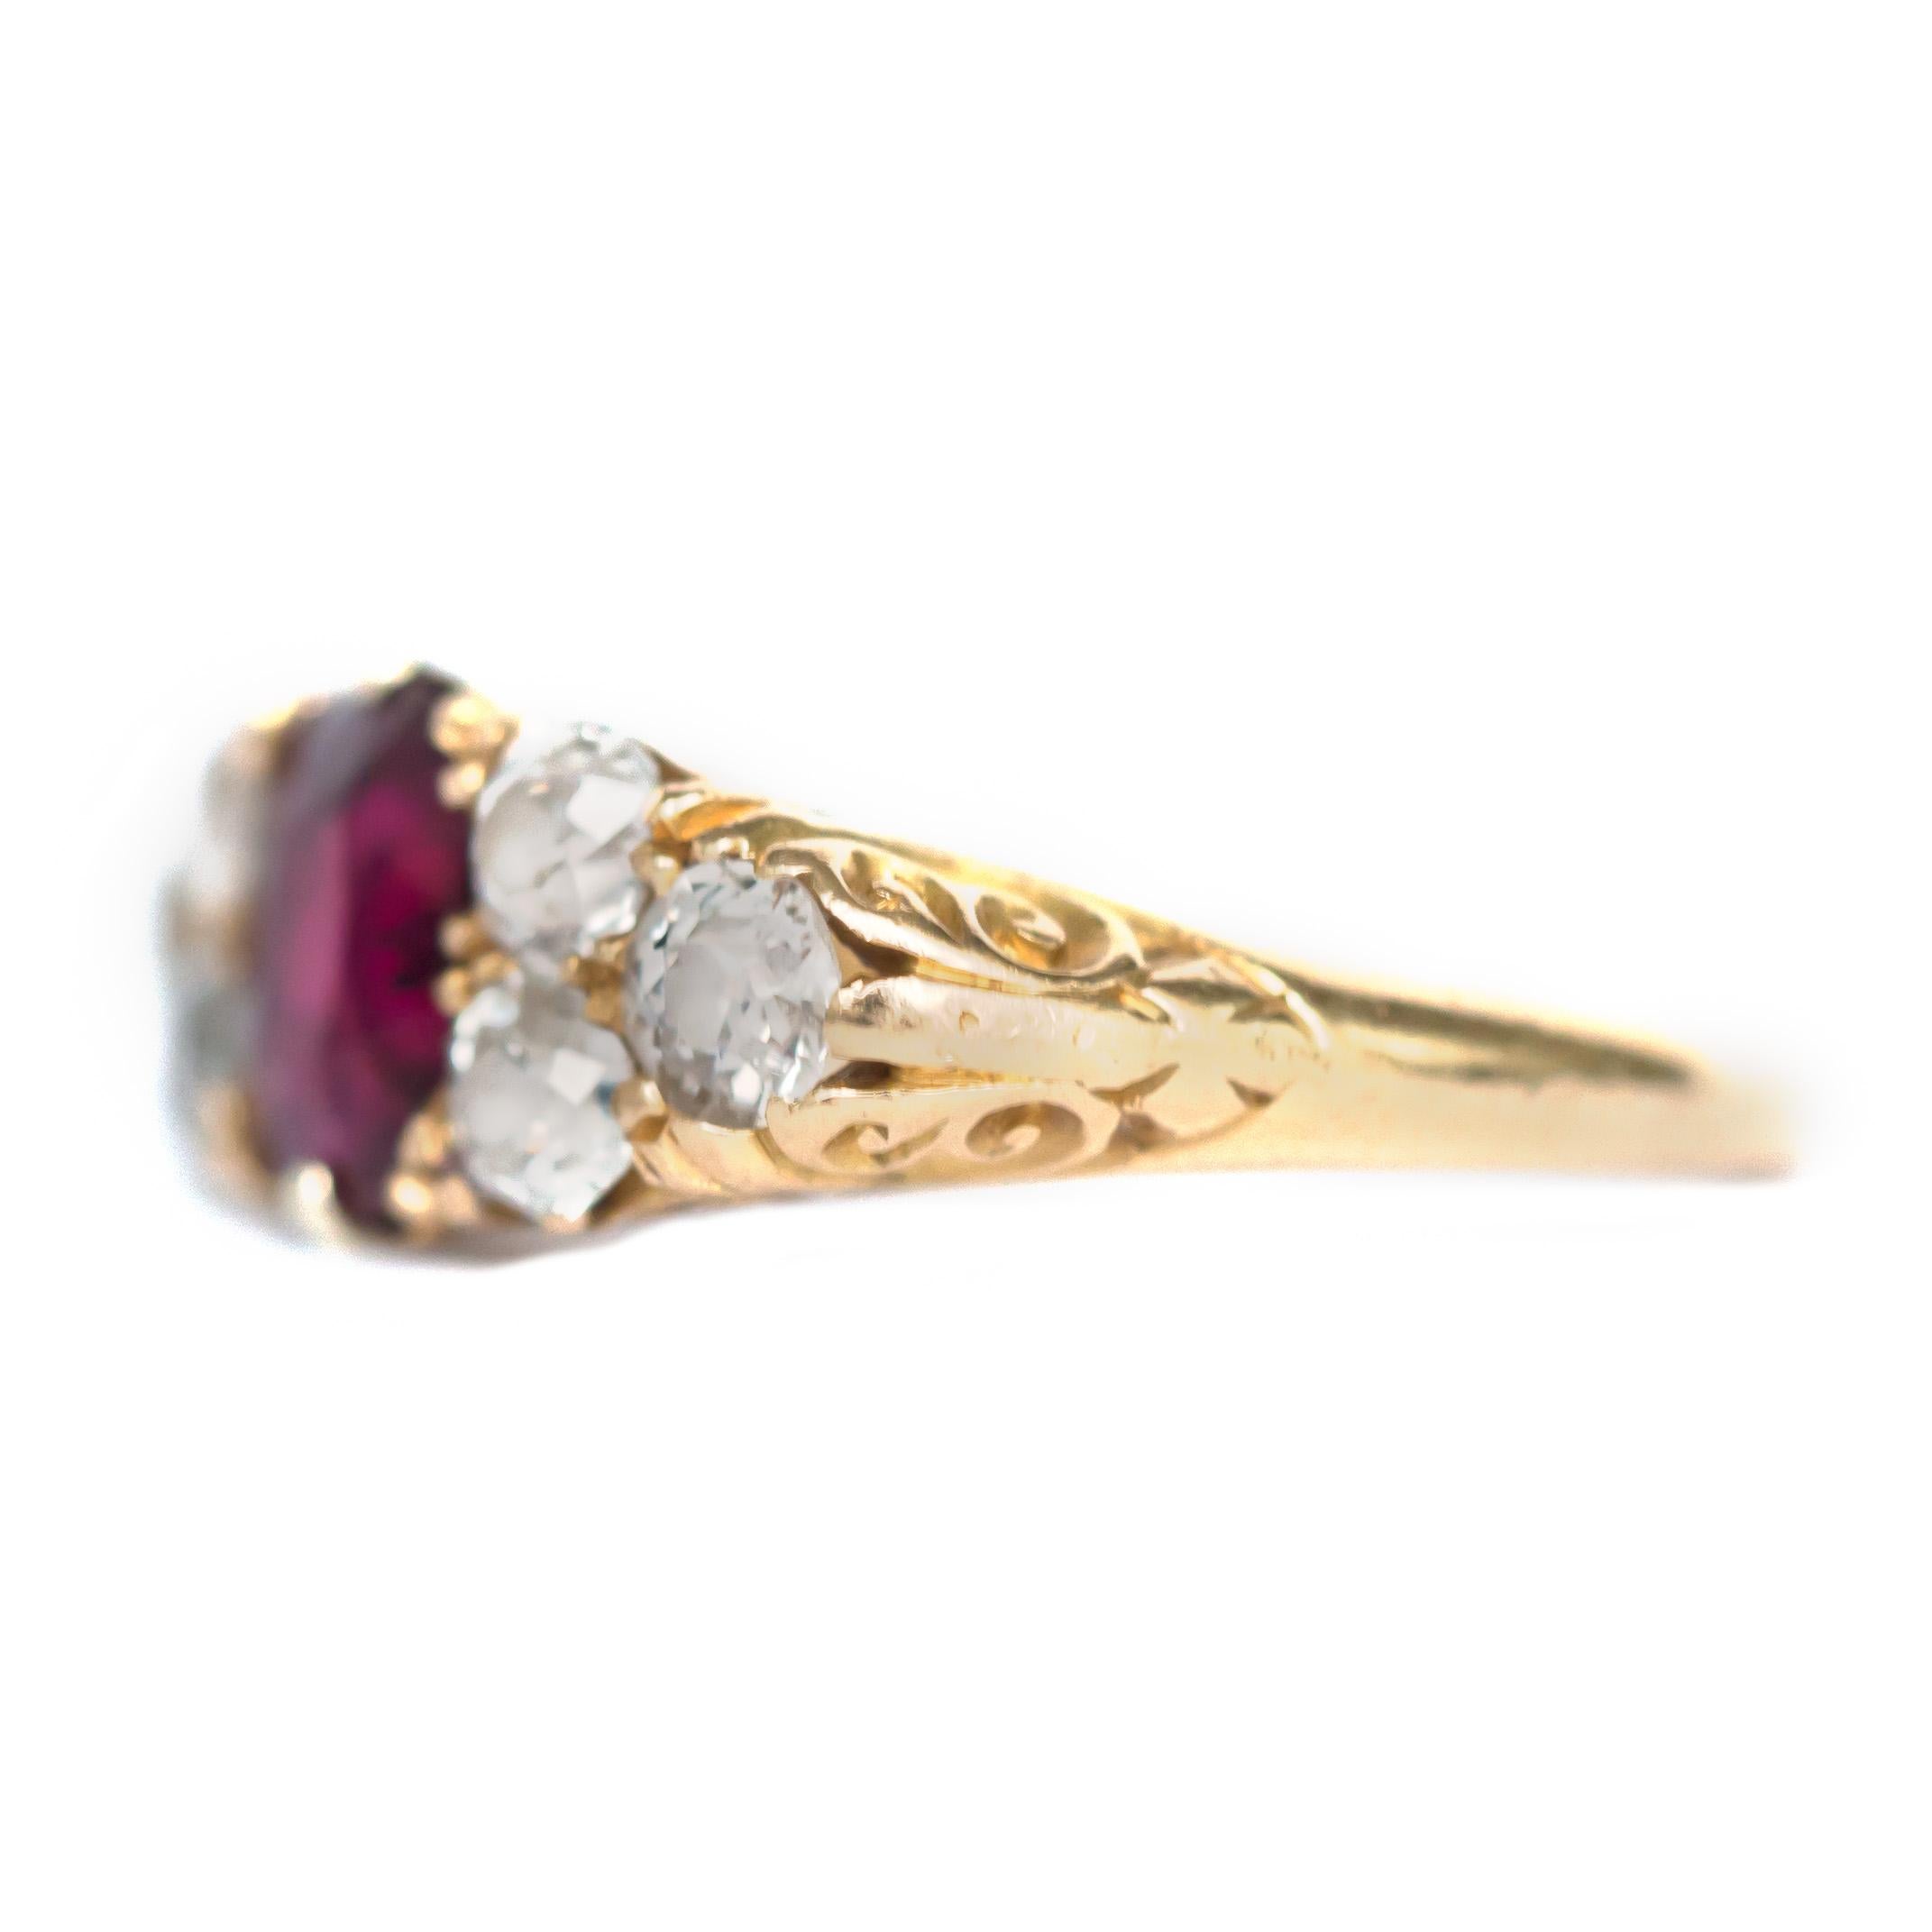 Ring Size: 5.50
Metal Type: 18 karat Yellow Gold 
Weight: 3.6 grams

Center Diamond Details
Type: Natural Ruby
Carat Weight: 1.00 carat
Color: Deep Red

Side Stone Details: 
Shape: Old Mine Cushion
Total Carat Weight: .50 carat total weight
Color: